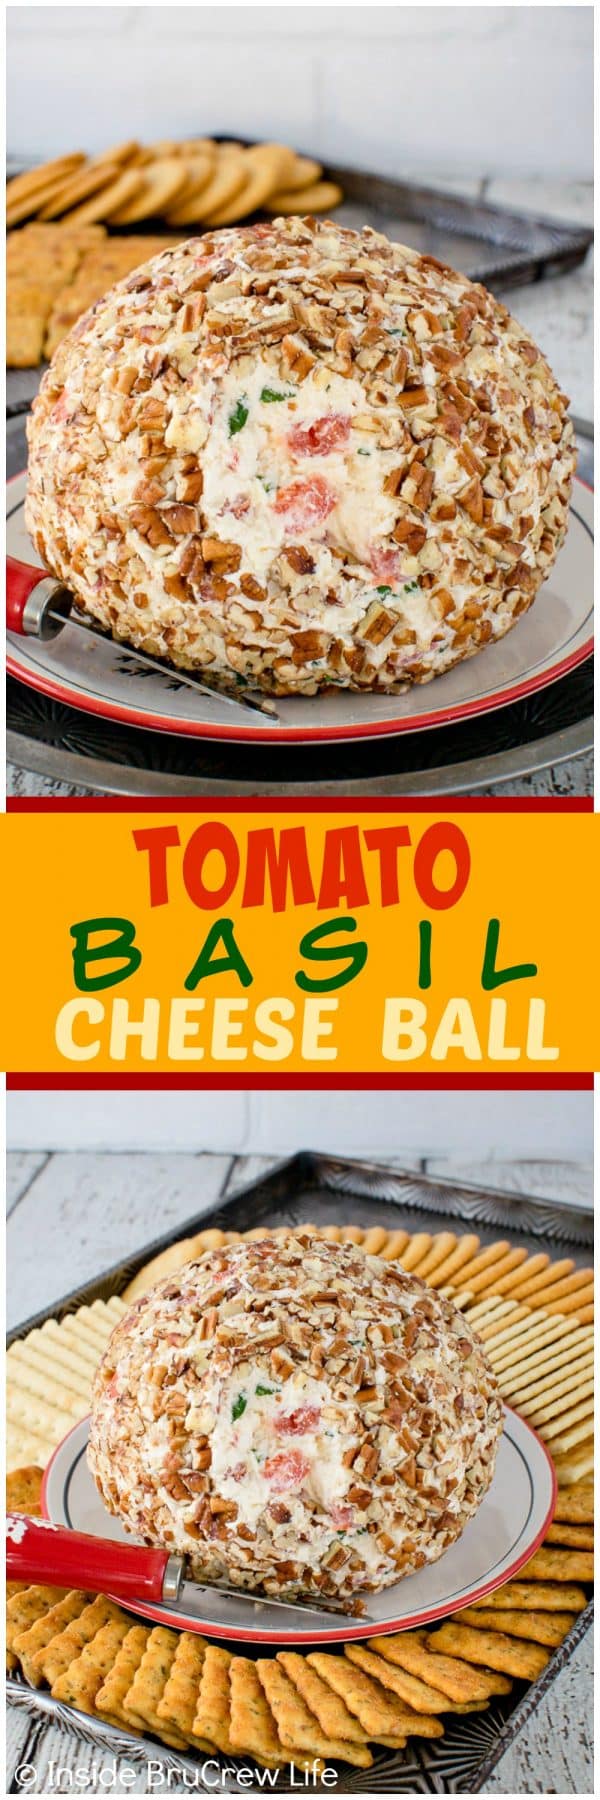 2 pictures of a homemade cheeseball separated with a text box.